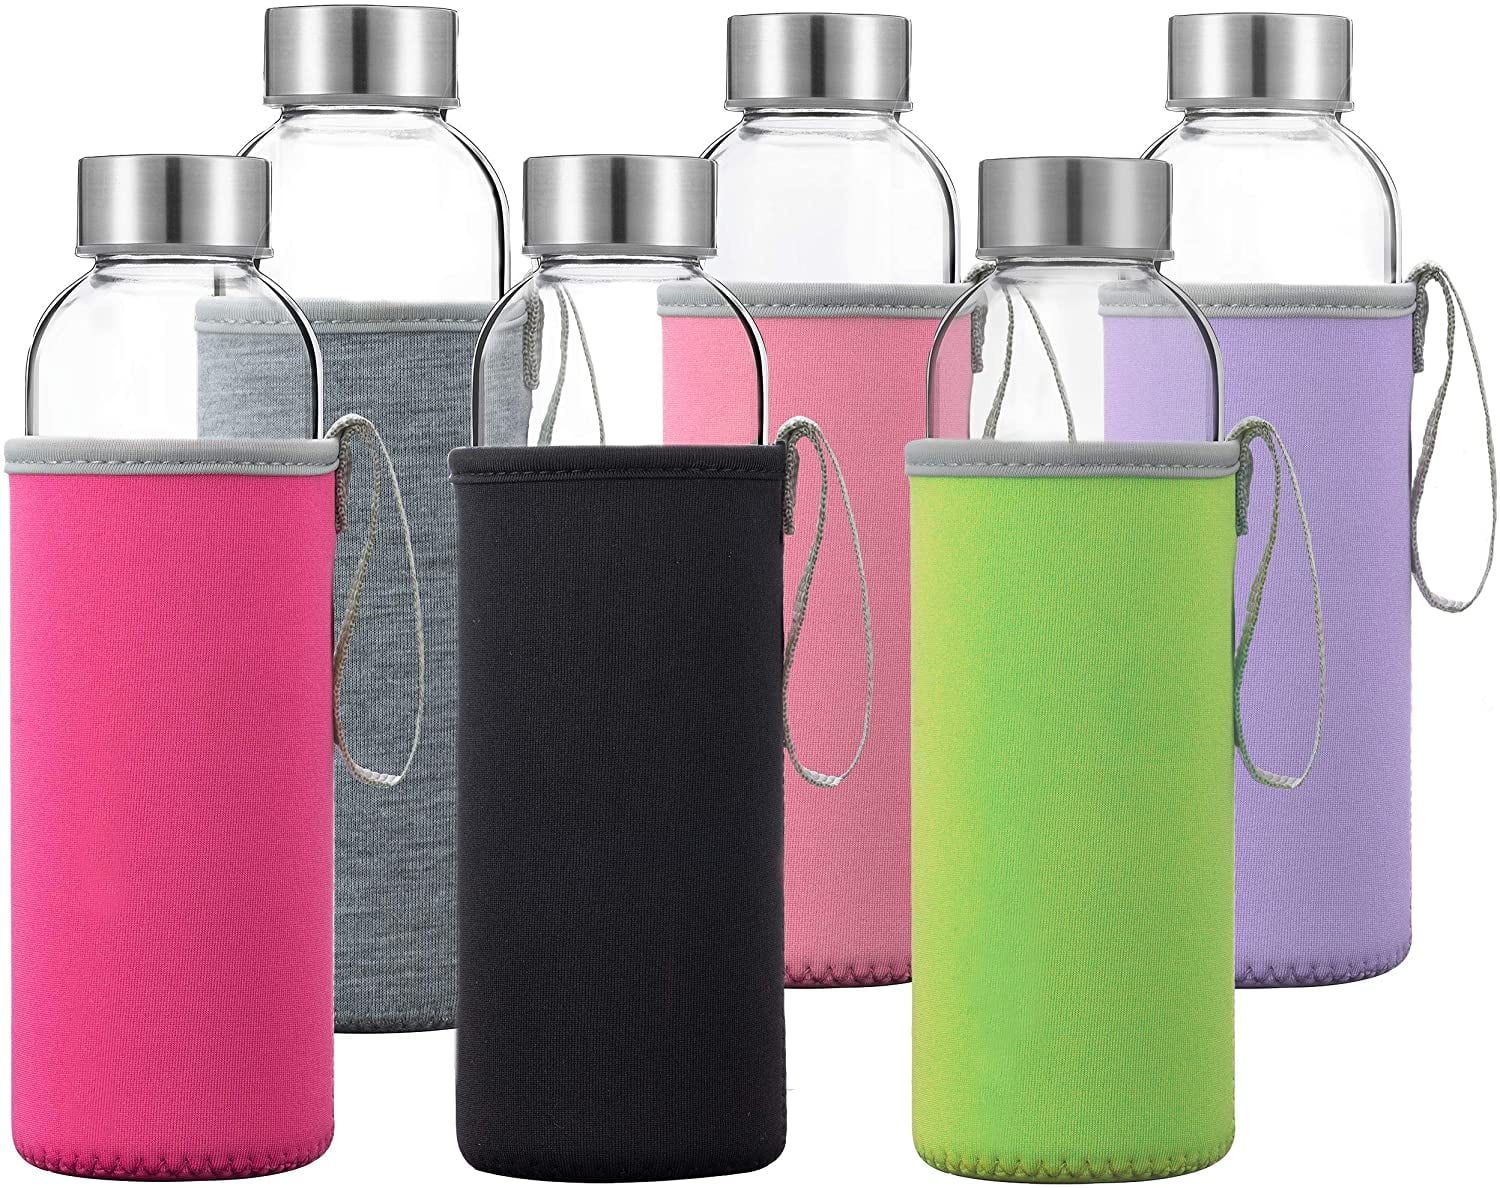 Glass Water Bottles 6 Pack With Sleeves and Stainless Steel Lids - 18oz  Size - Leak Proof Caps, Reus…See more Glass Water Bottles 6 Pack With  Sleeves